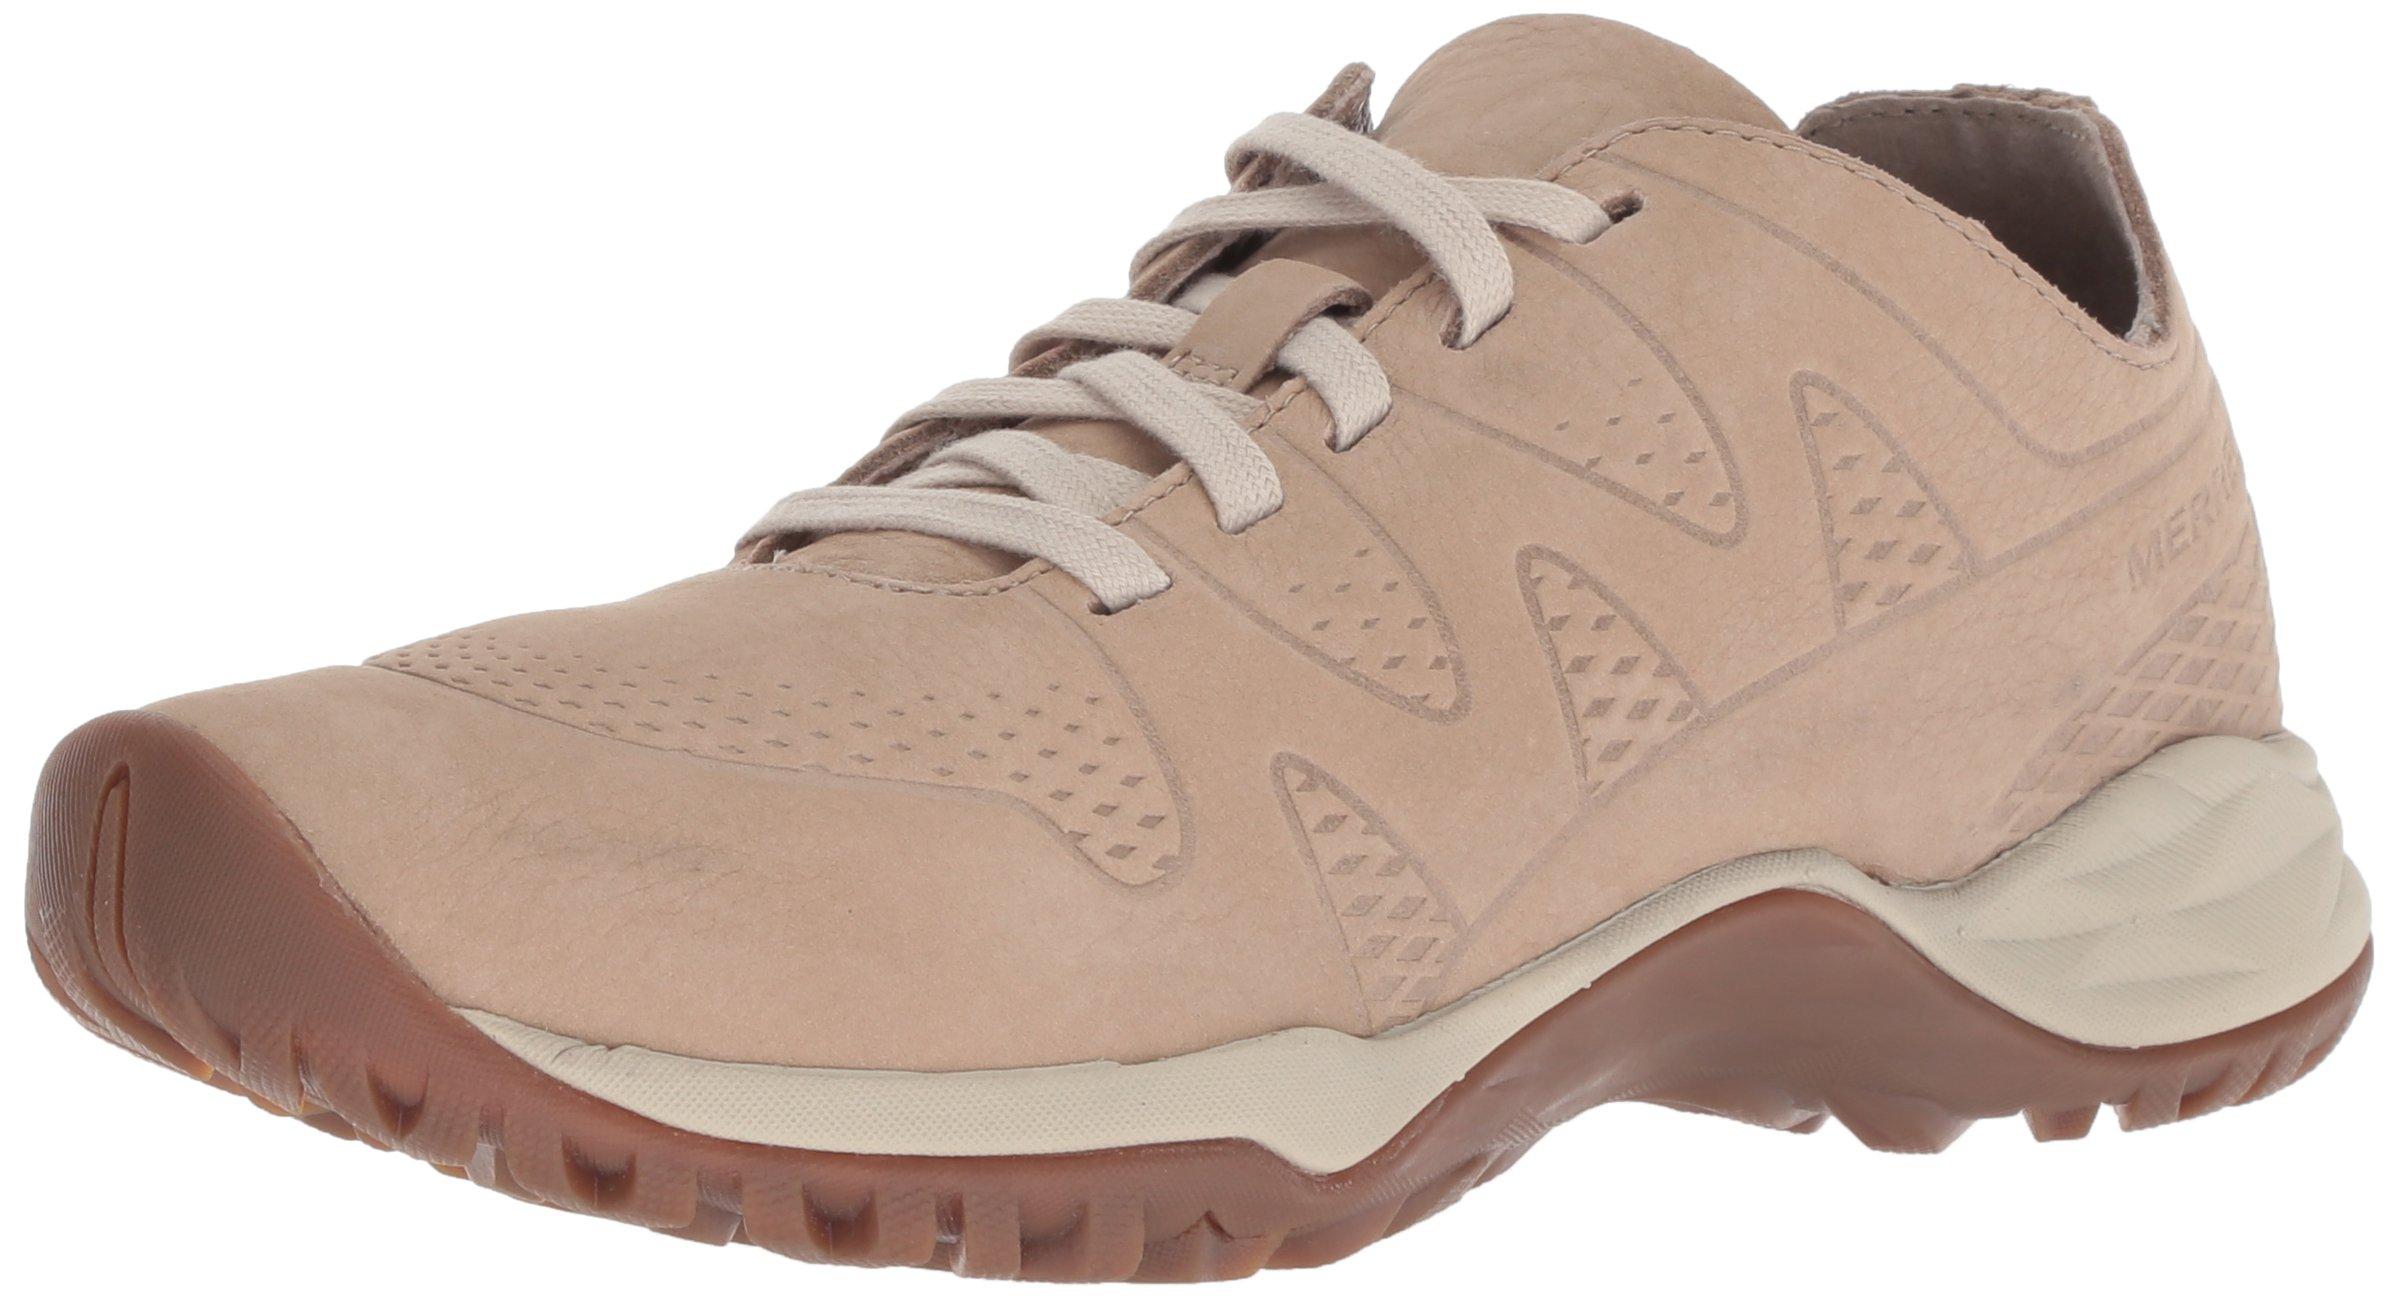 Merrell Siren Guided Lace Leather Q2 